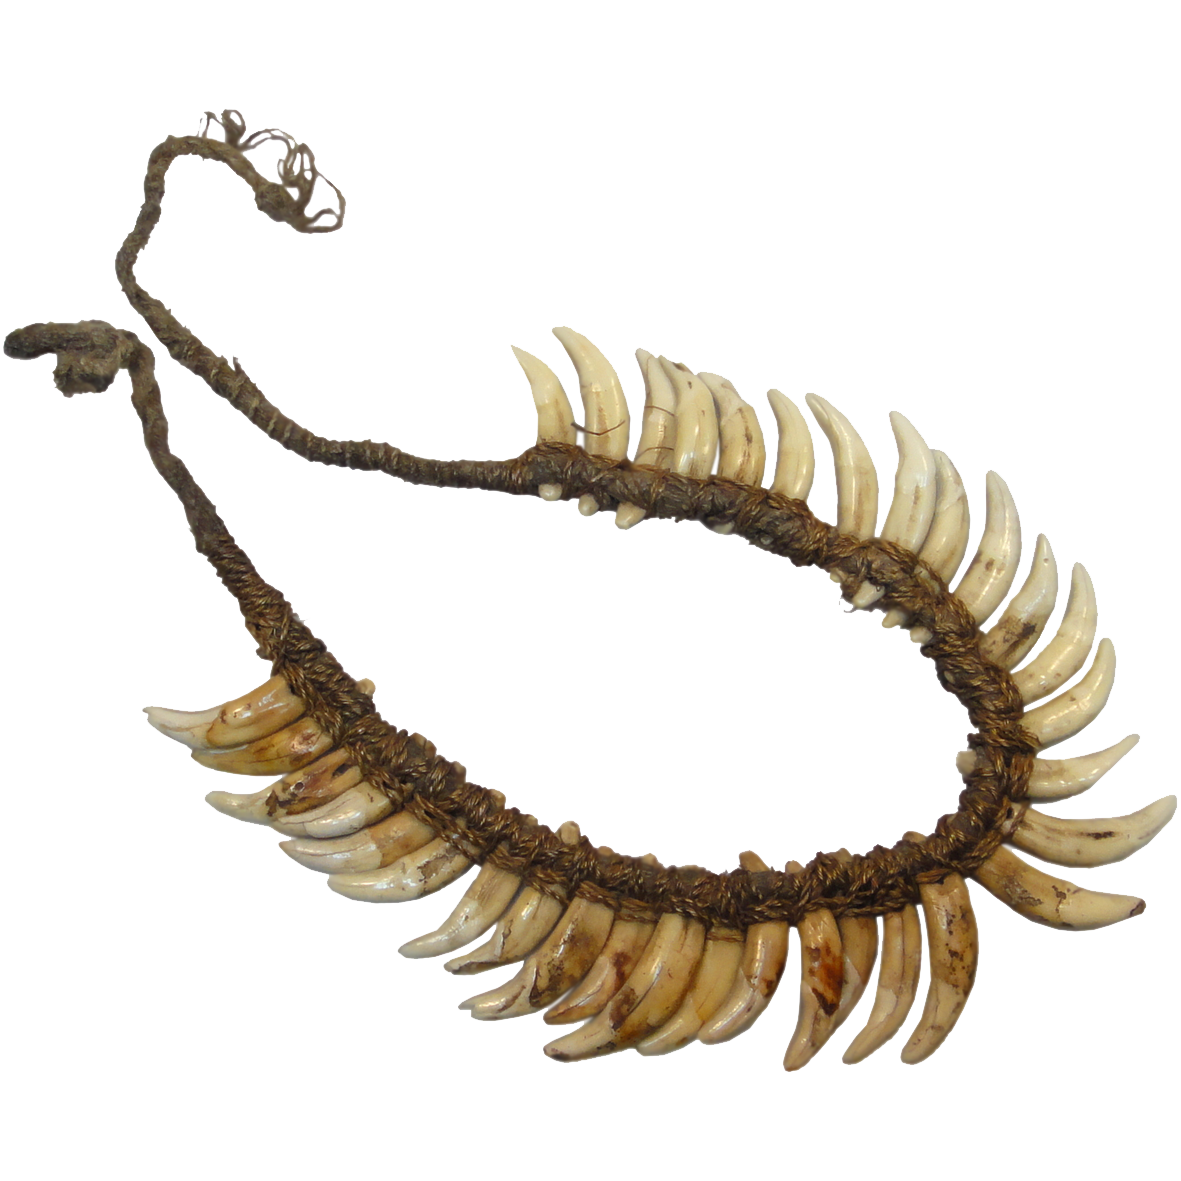 Indonesia/Papua New Guinea, necklace of dog teeth (obverse)